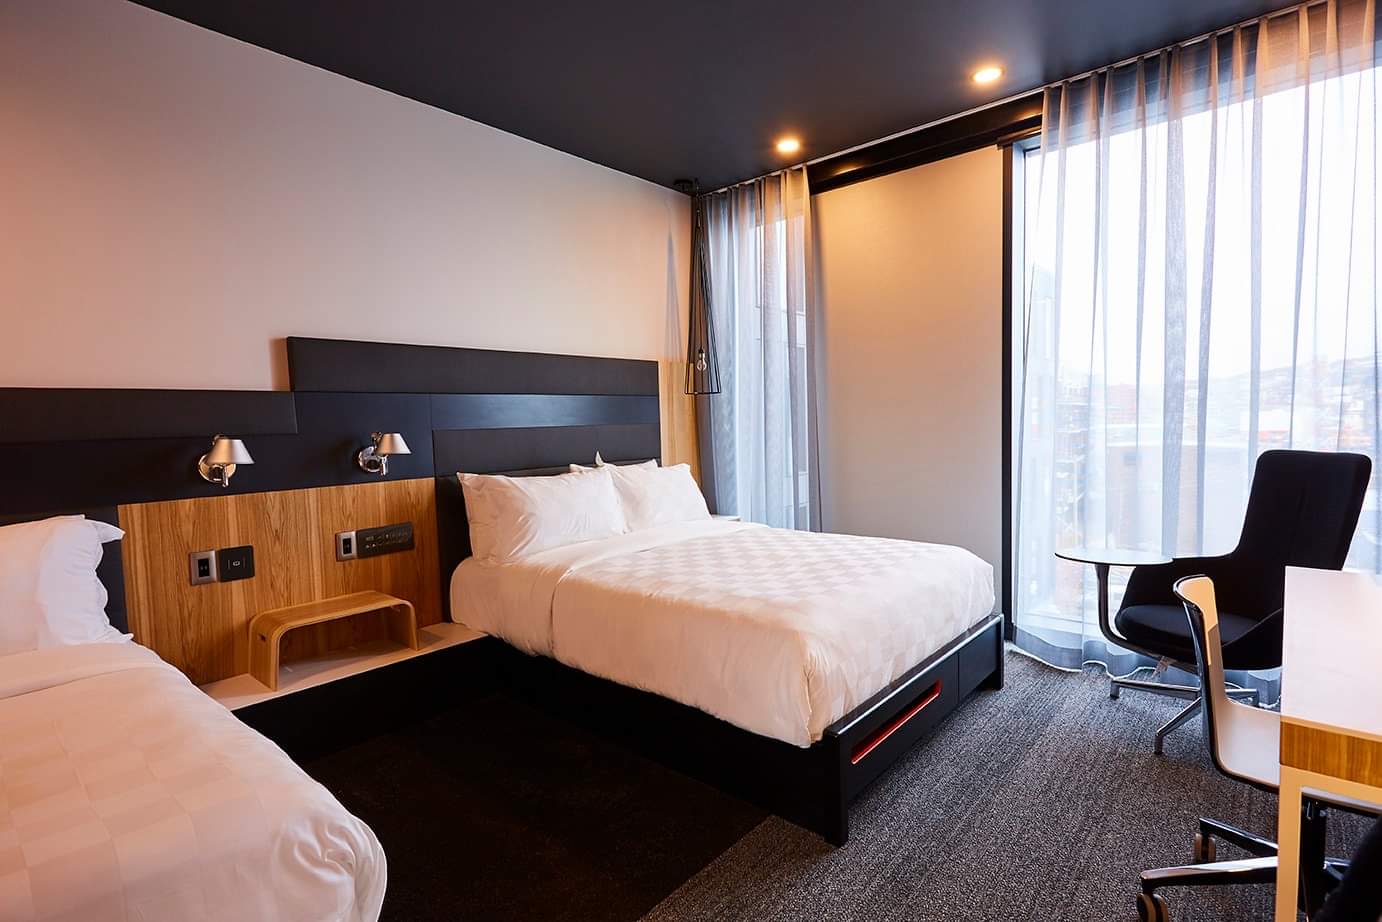 A photo of the interior of an accessible room at the Alt Hotel. A large window on the far wall, a desk and chair, a queen bed and a single bed with a nightstand in between the two.